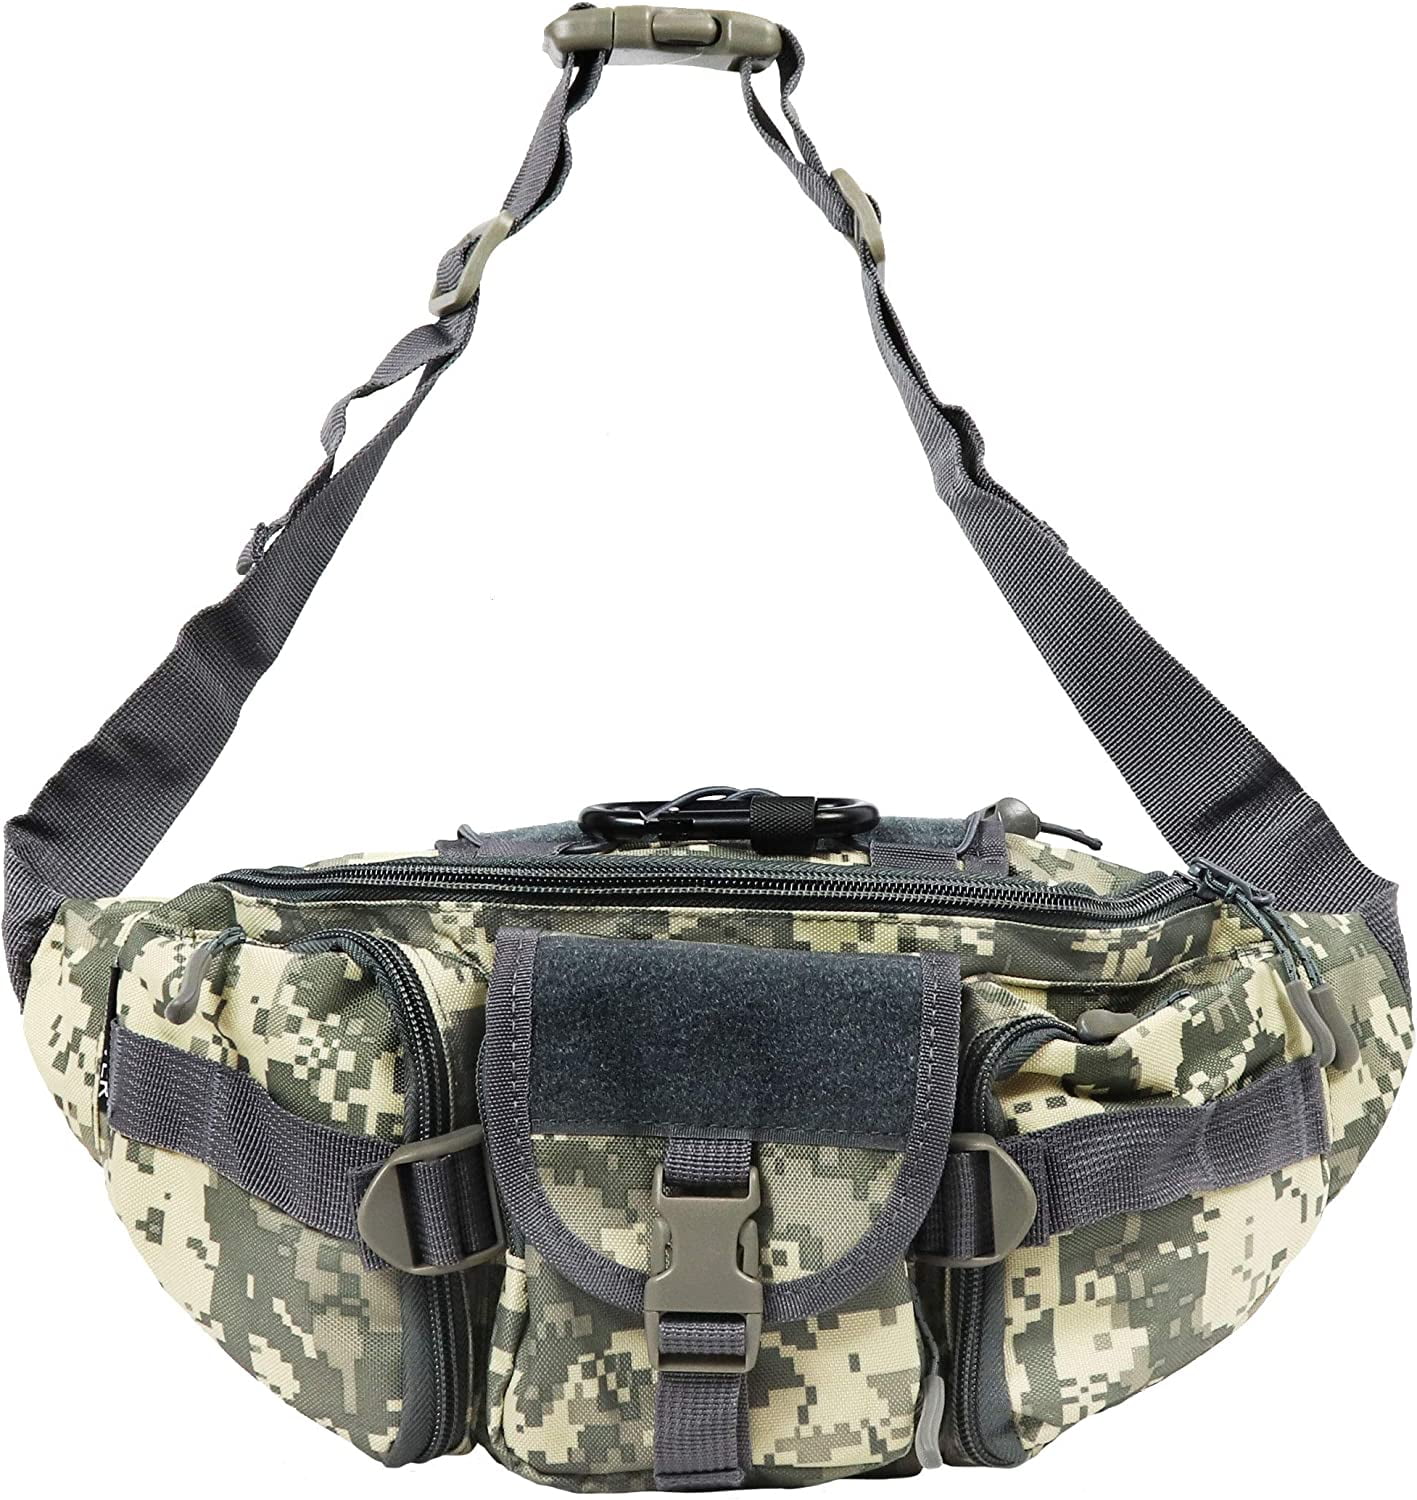 OSAGE RIVER Fishing Fanny Pack, 900D Nylon Fishing Tackle Bag, Heavy Duty  Outdoor Waist Bag, Crossbody Bag for Freshwater or Saltwater Fishing Gear,  Camo 